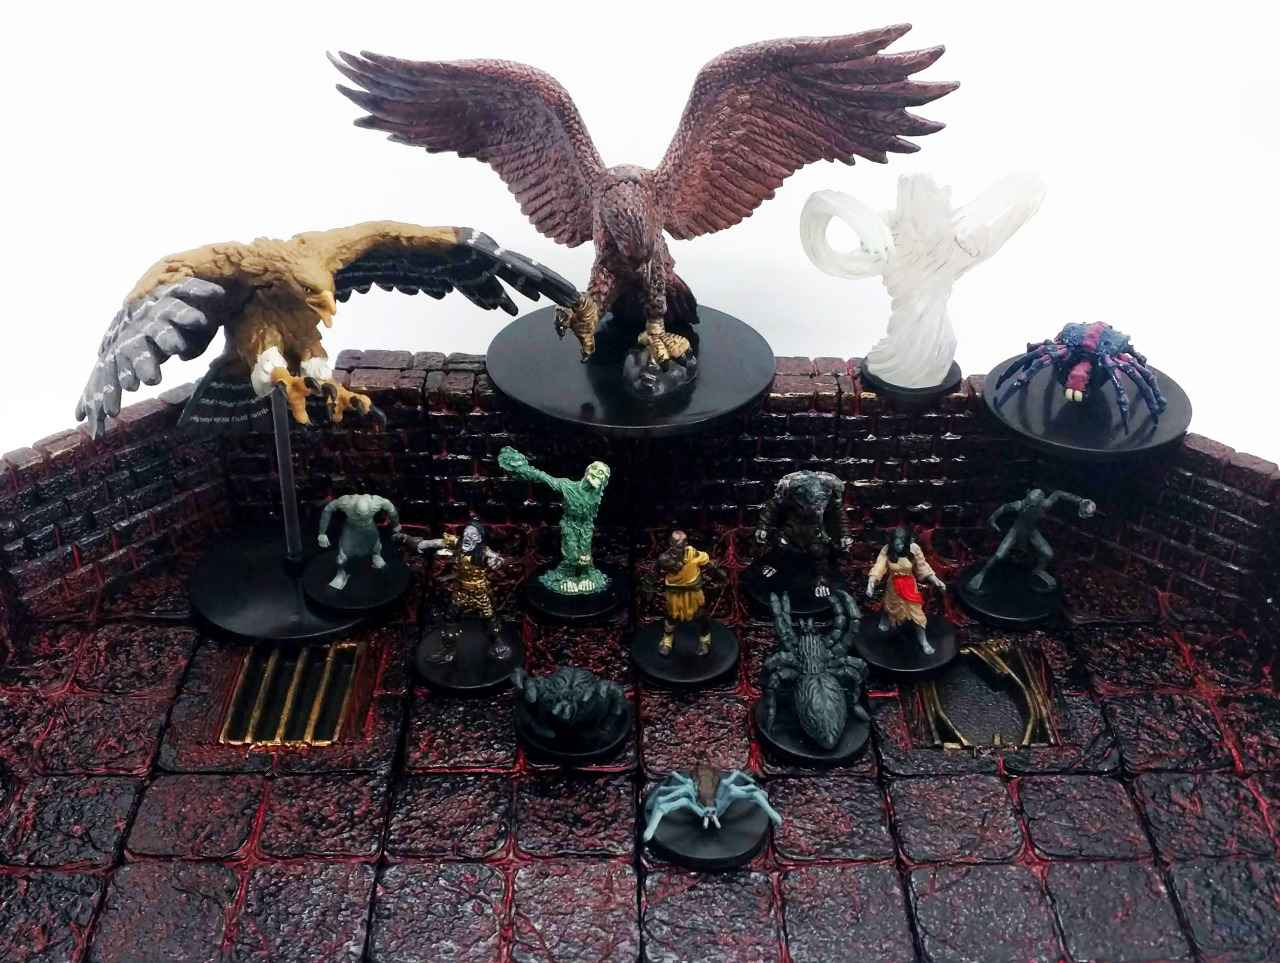 Uniquely Handcrafted and Painted Terrain Piece for DnD and Table Top Wargaming Sleeping Dragon atop its hoard